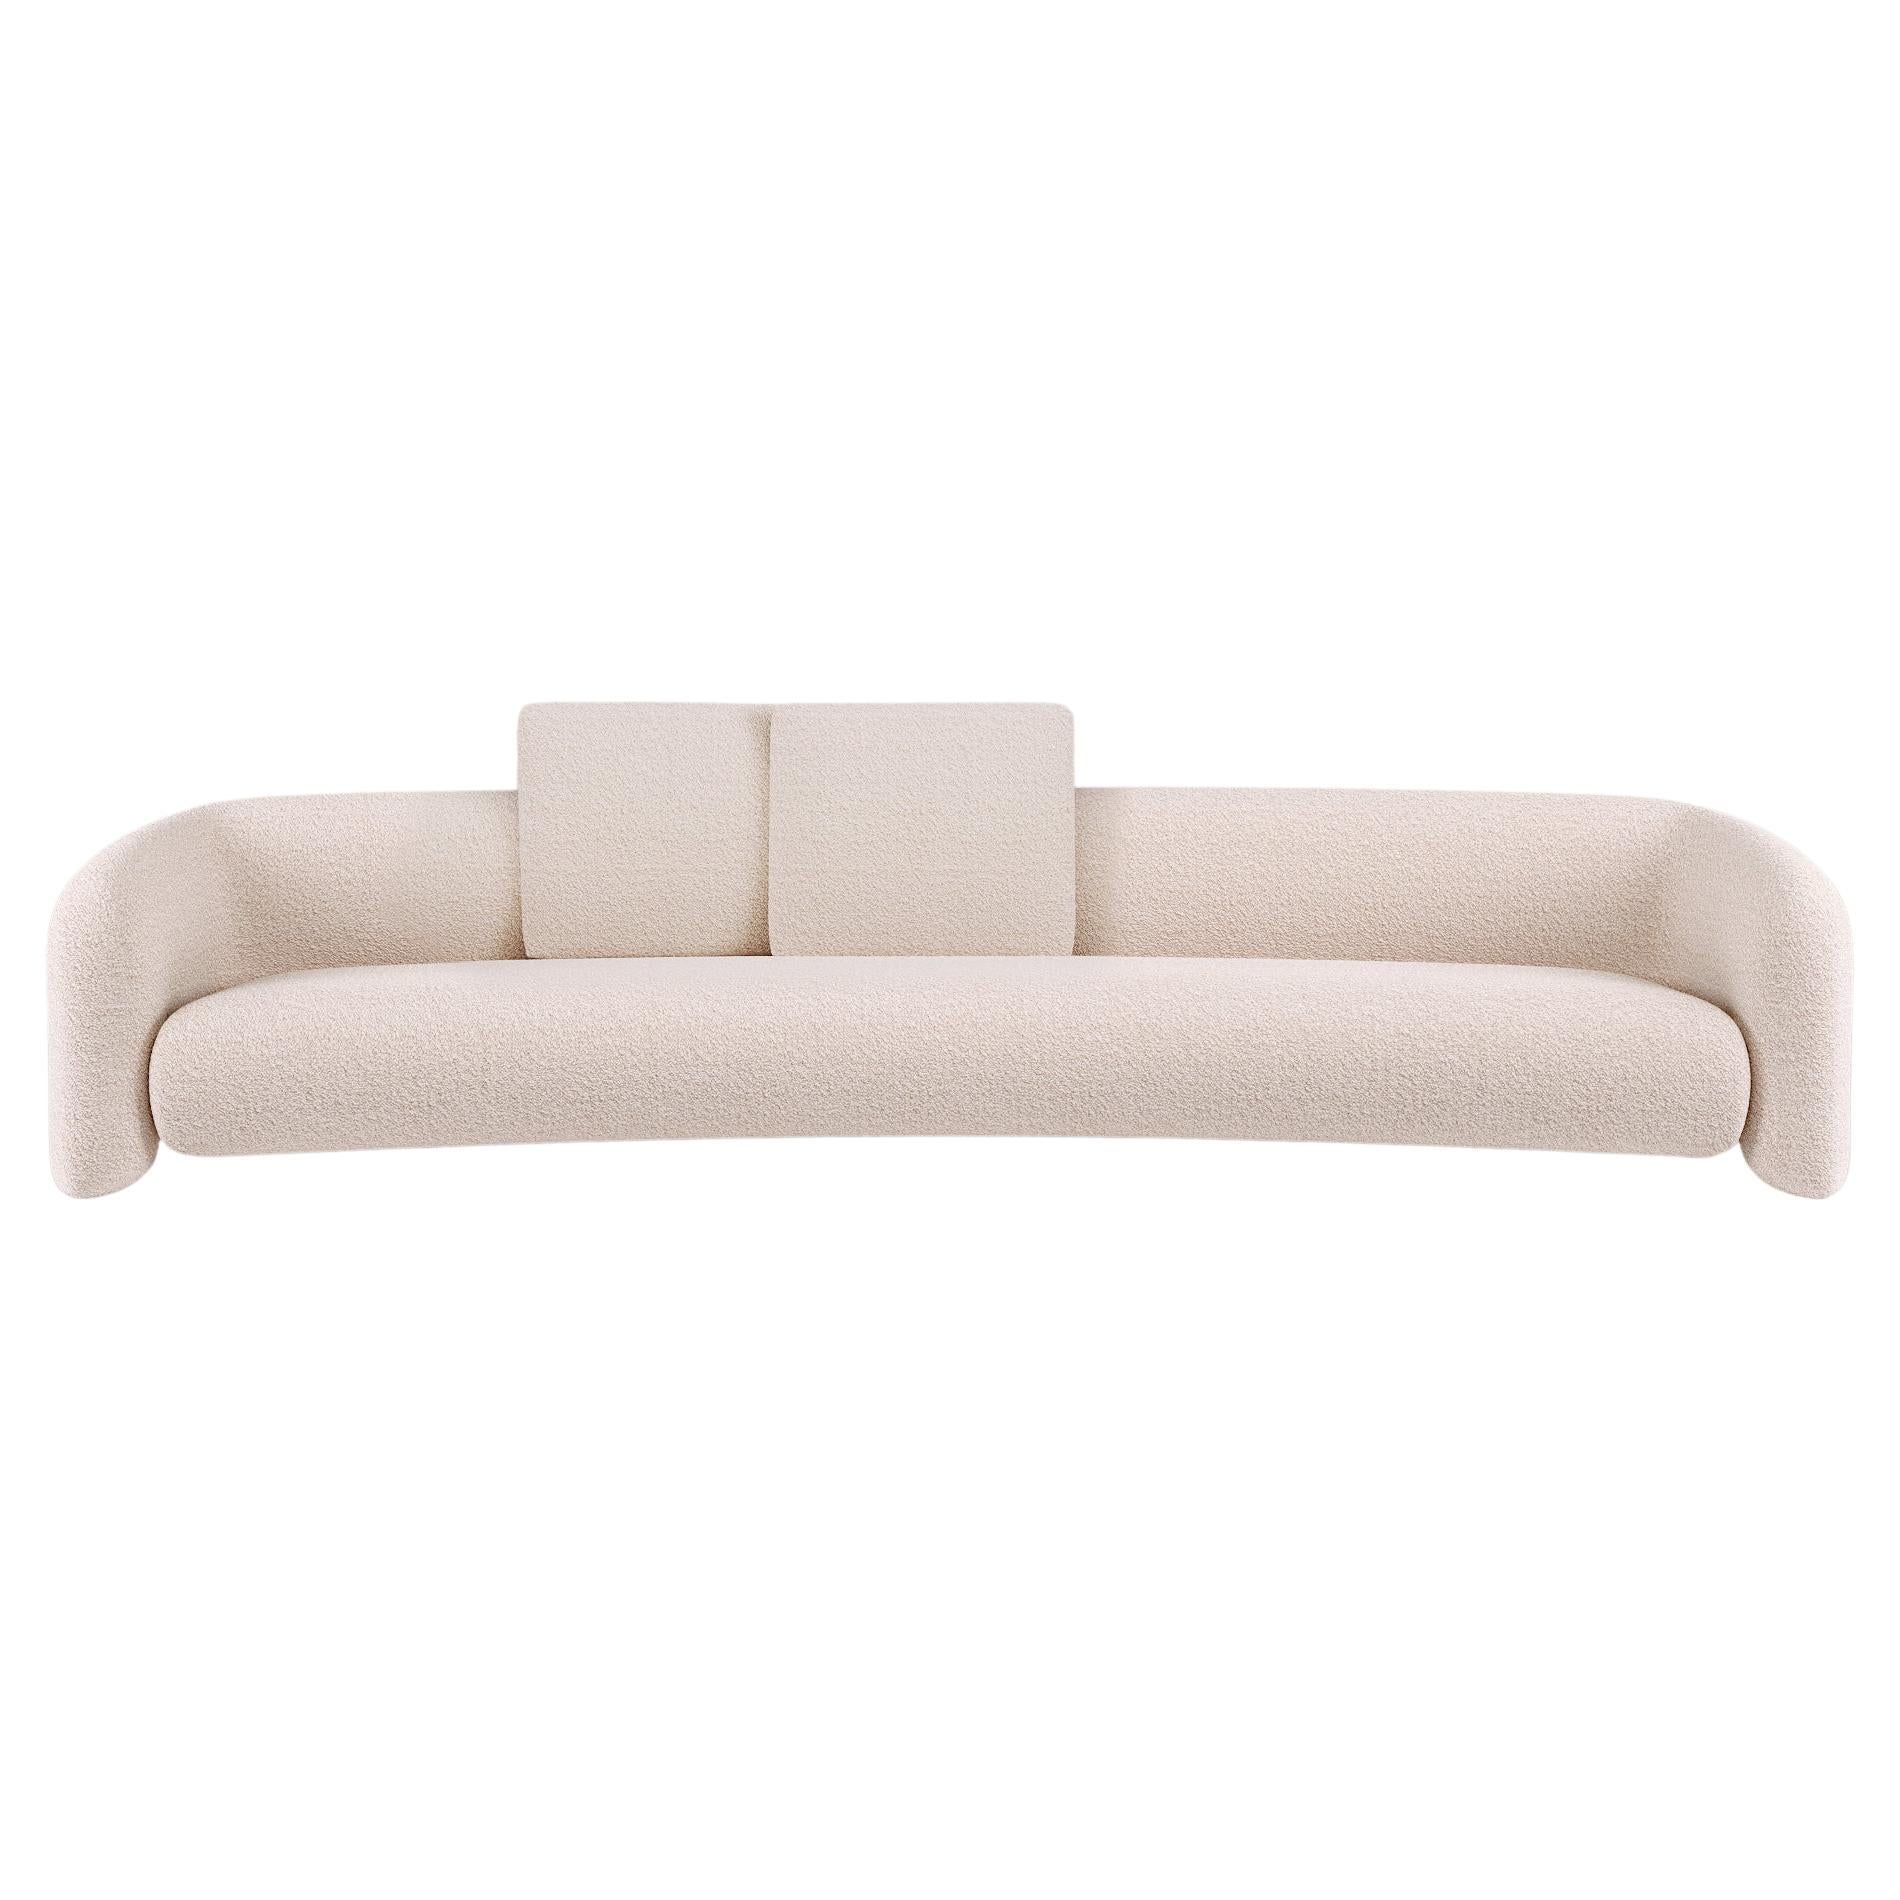 Bold Sofa Curved Open arms - Barnum 024 For Sale